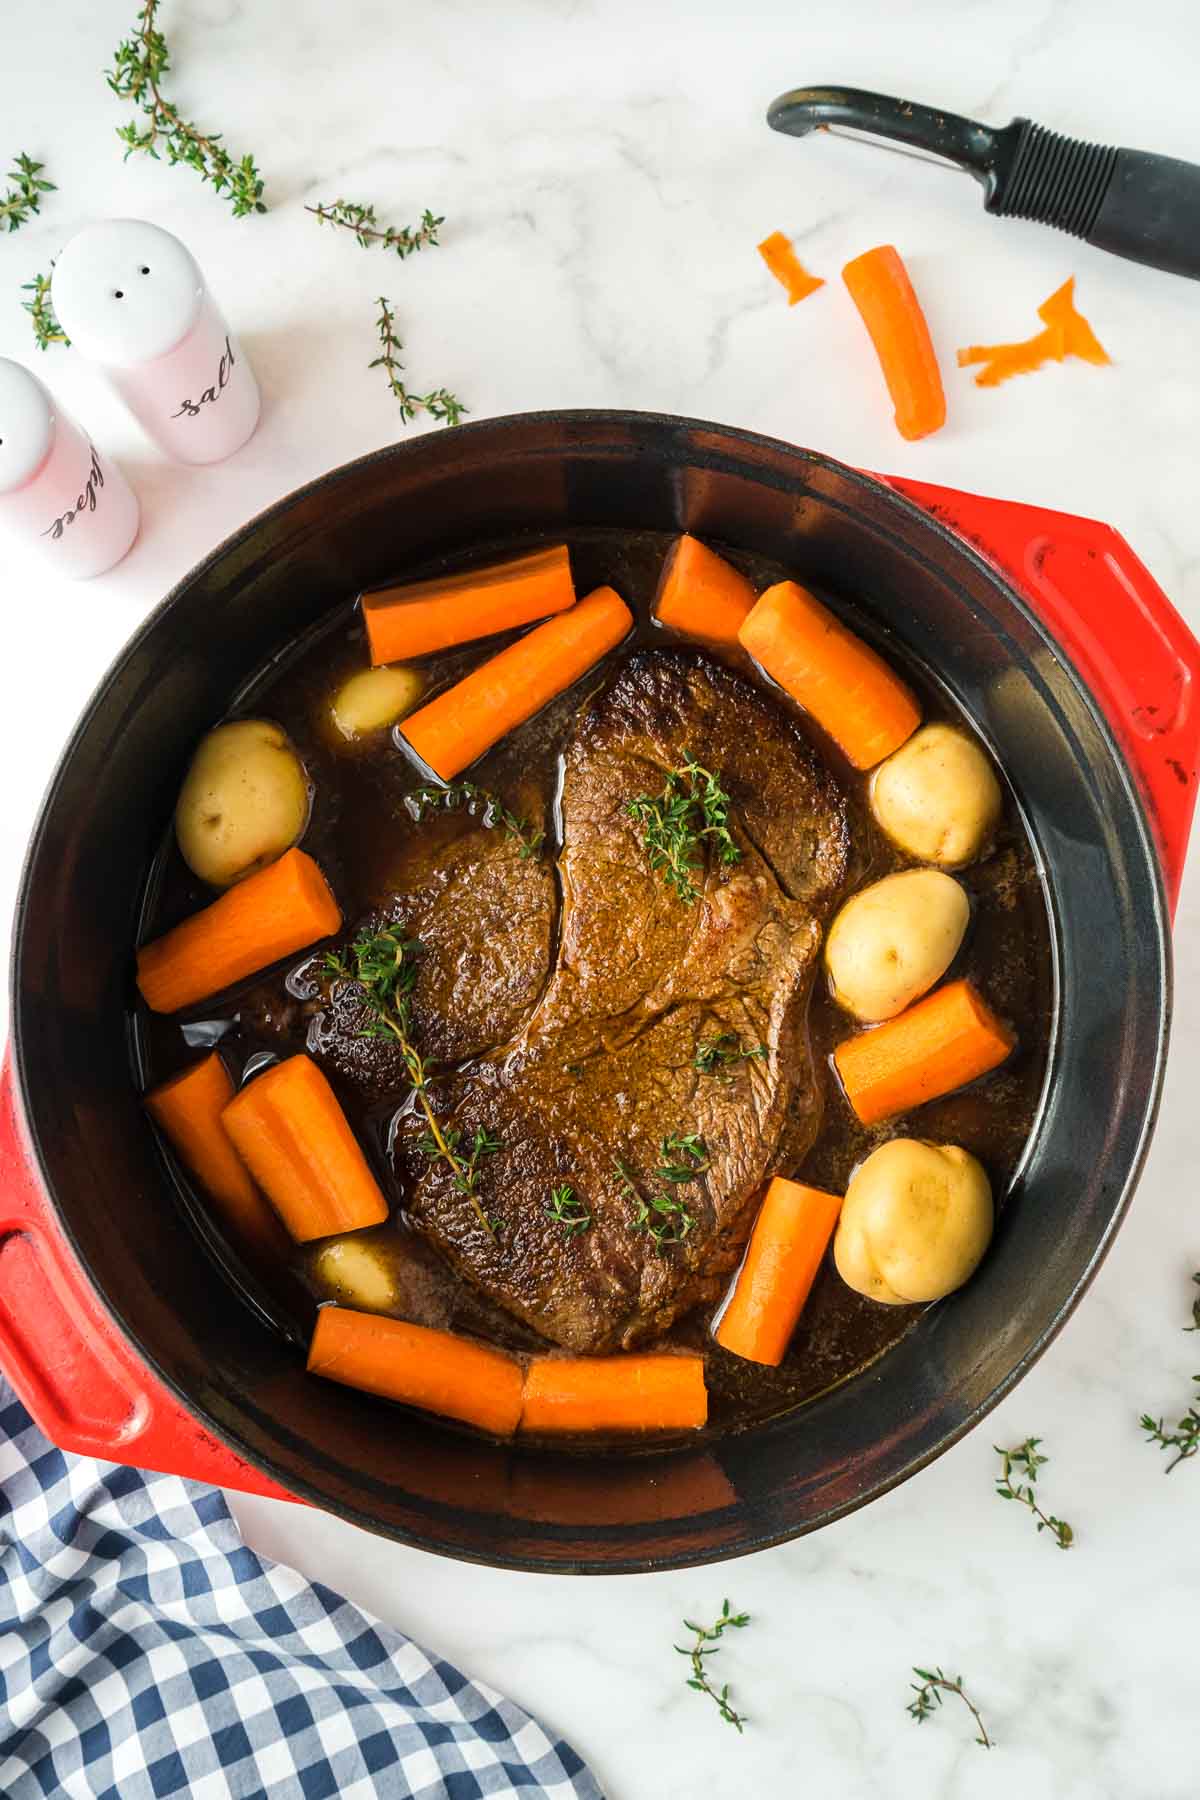 Pot roast in a dutch oven with carrots and potatoes before cooking in the oven.